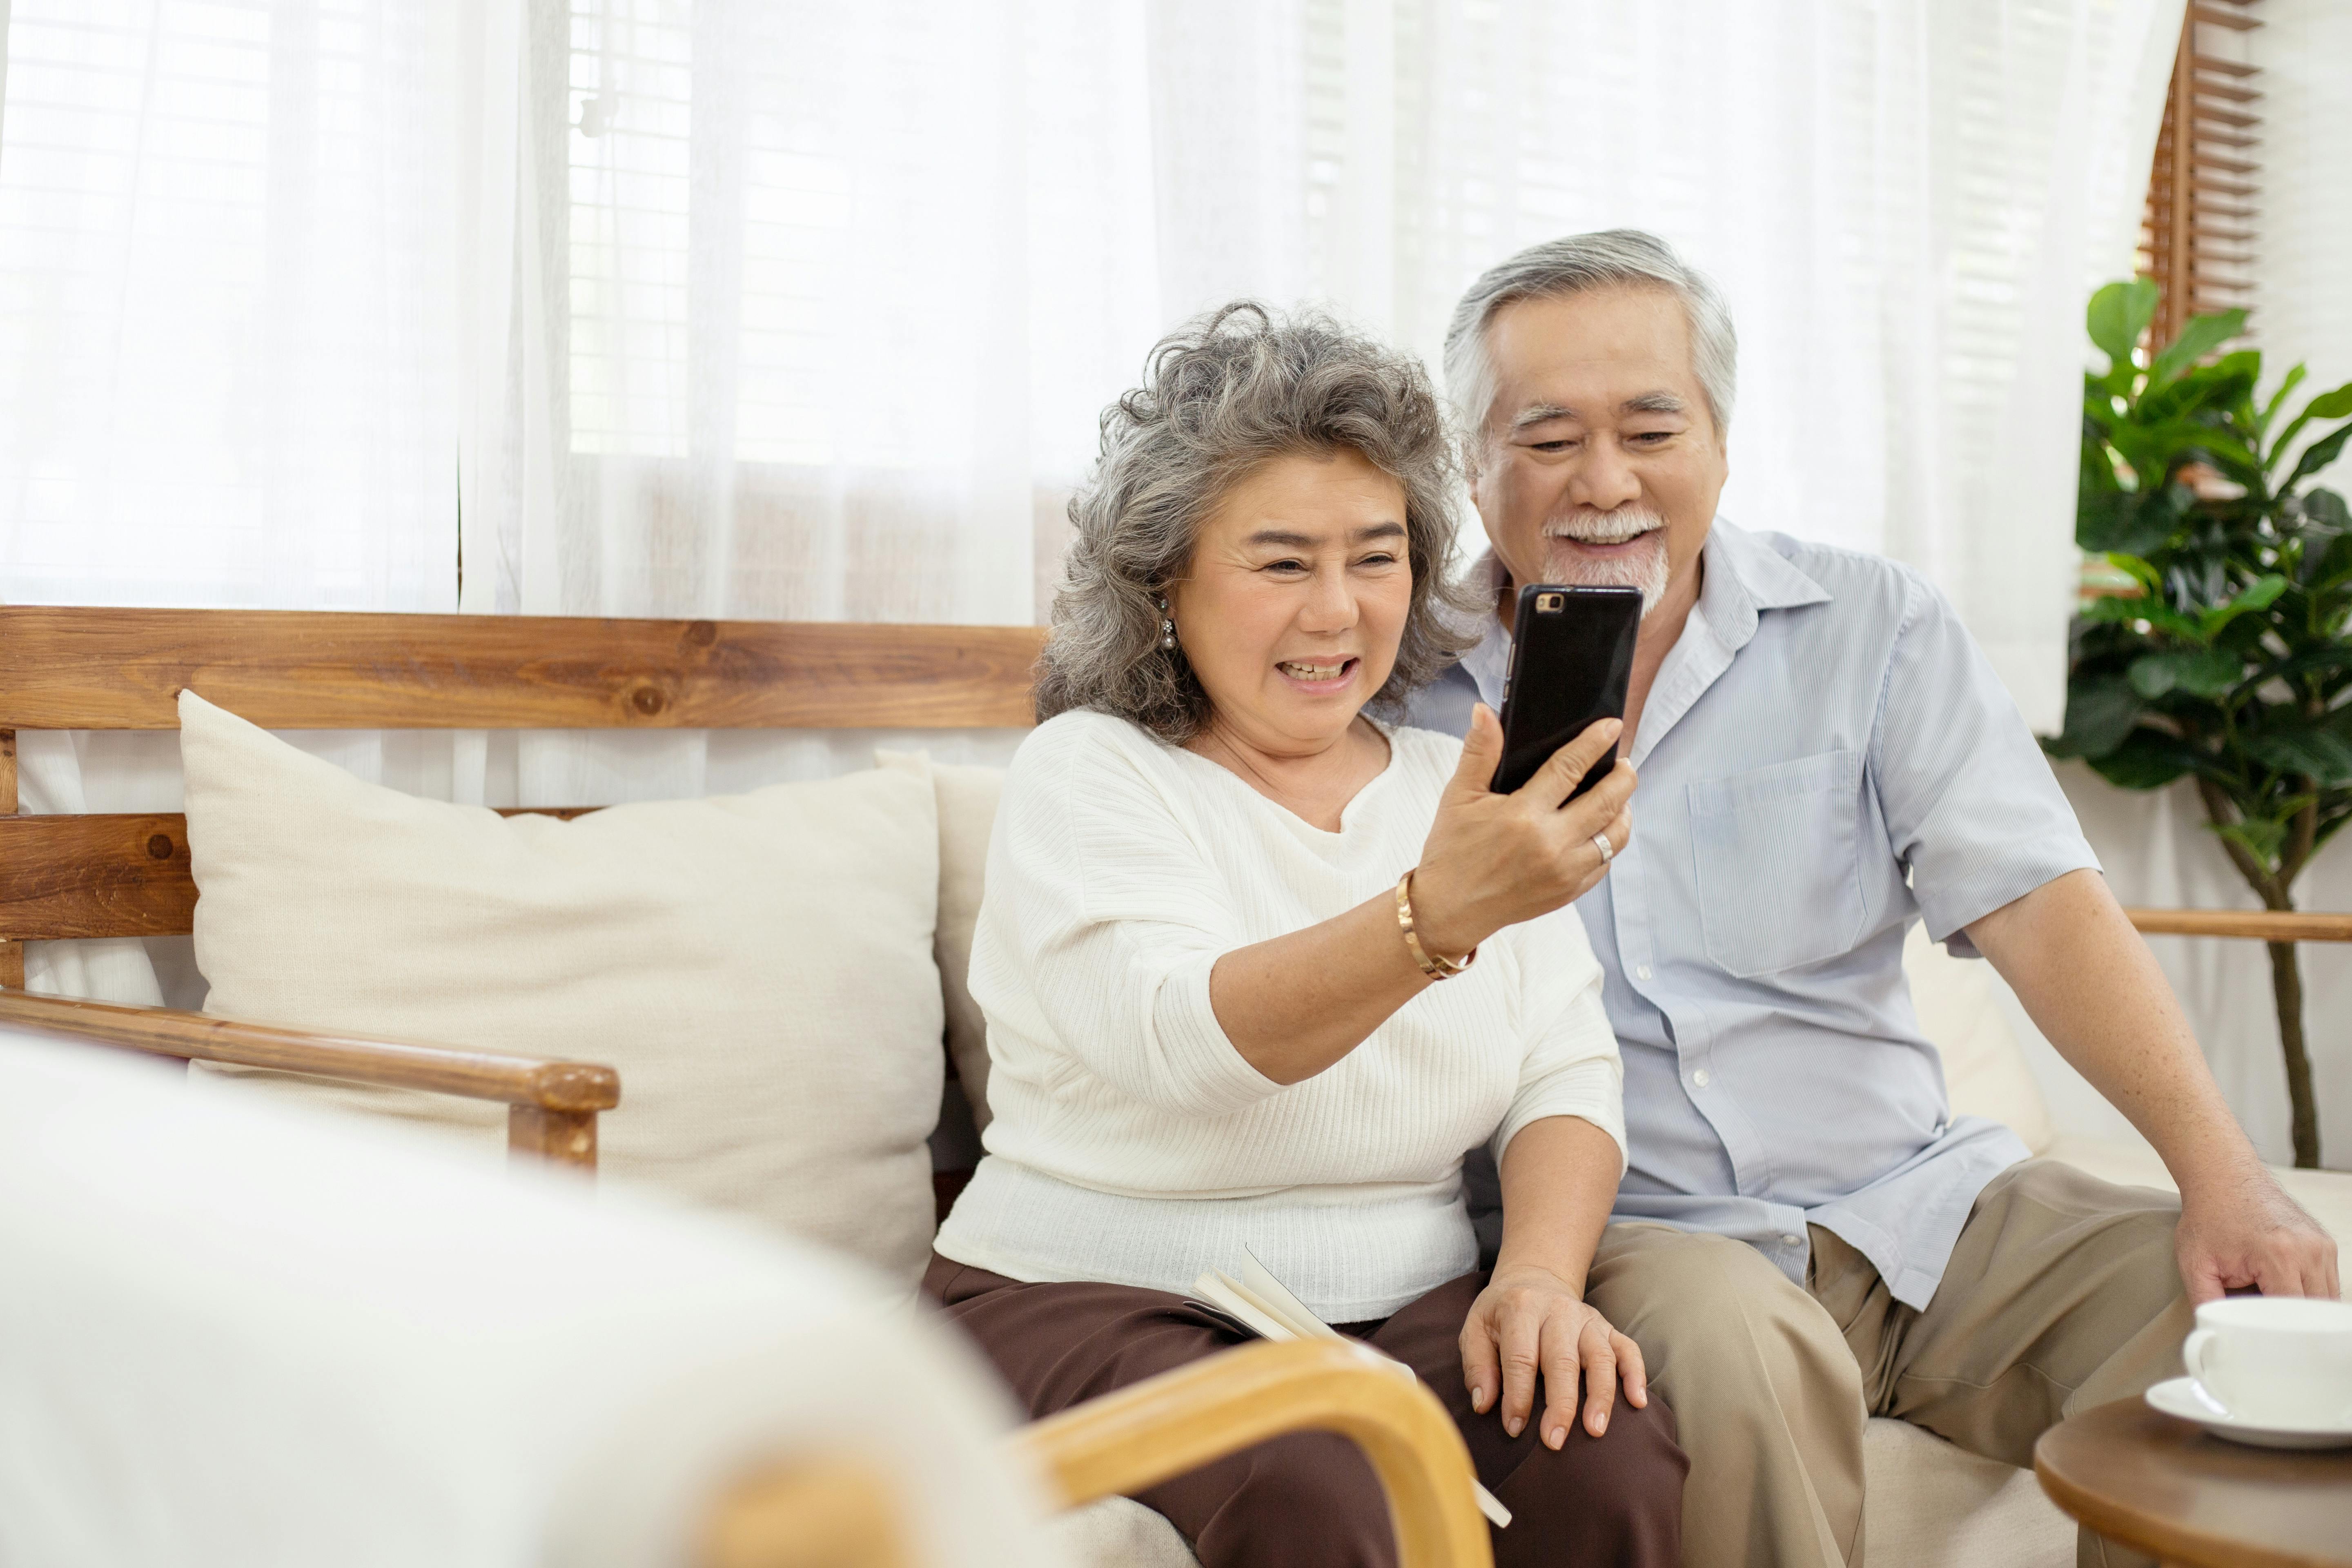 Long distance caregiving: tips for caring from afar